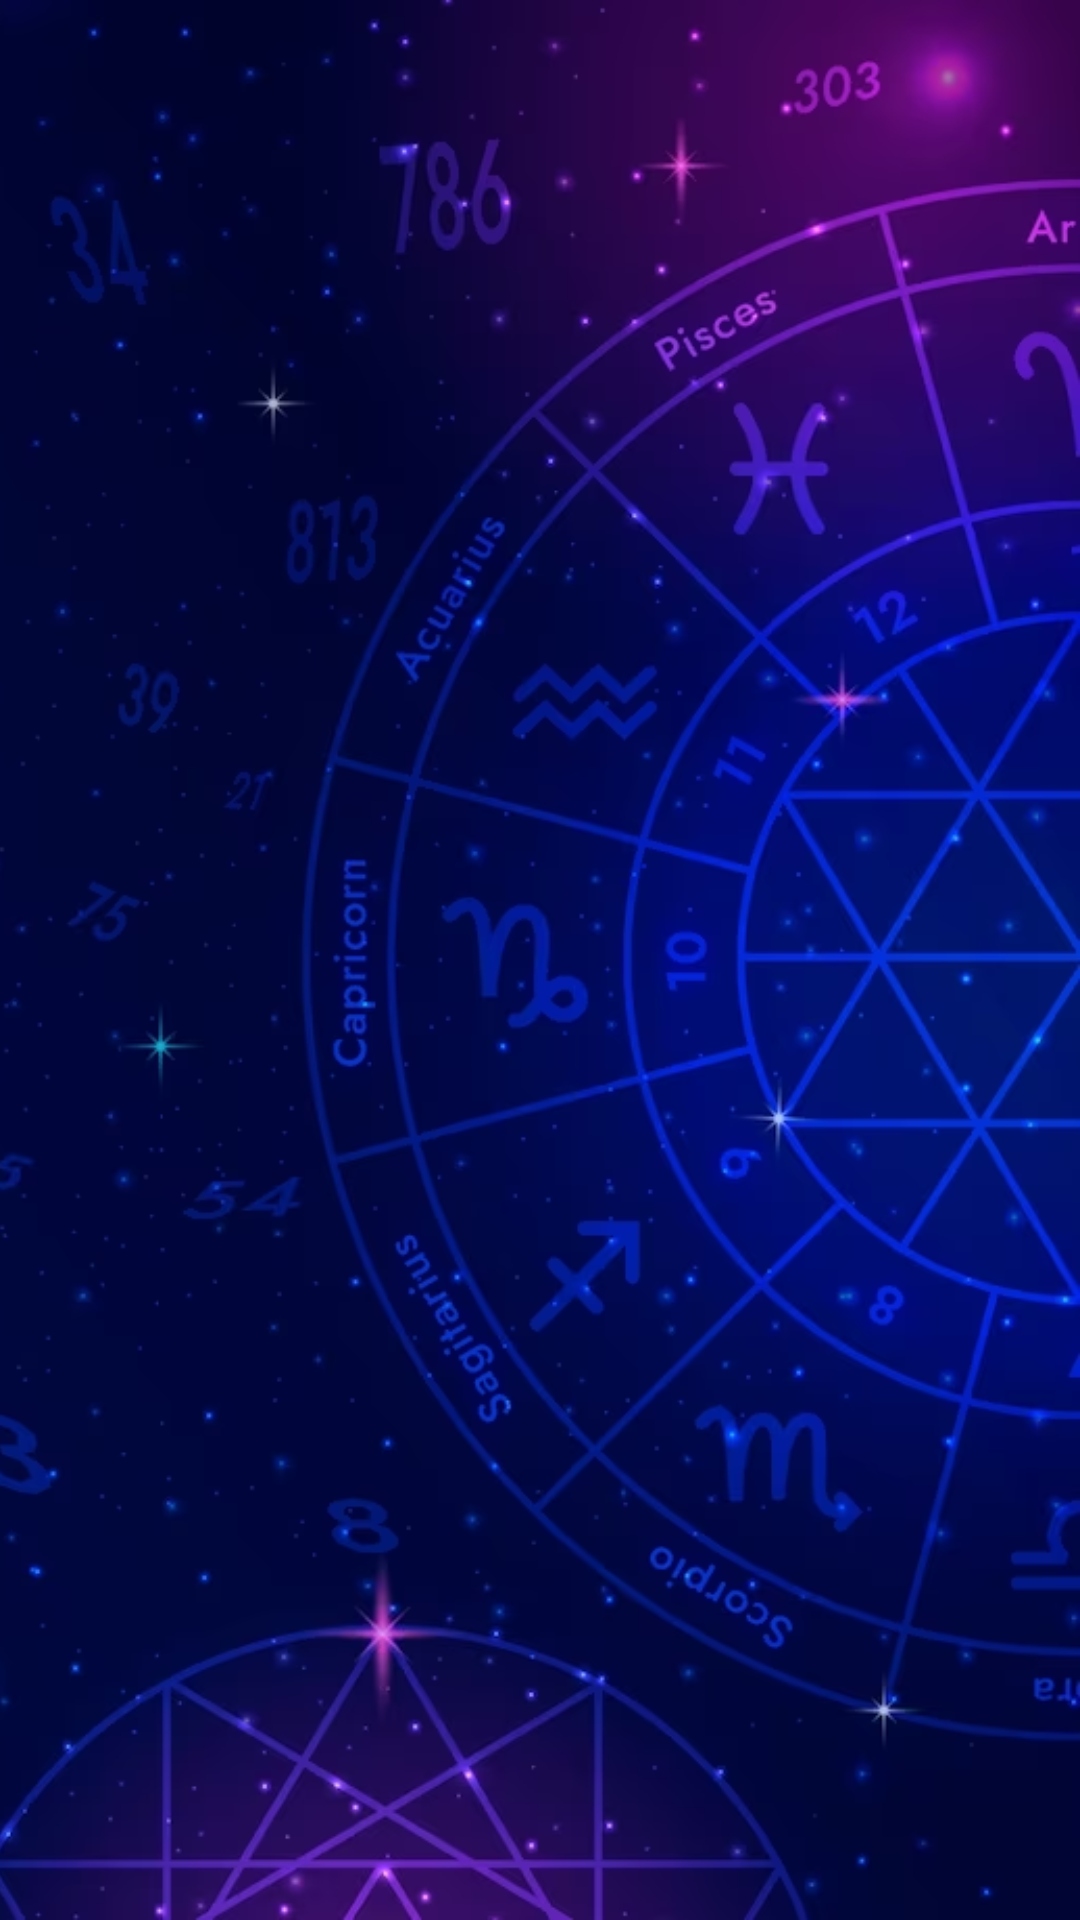 Know lucky colour and number for all zodiac signs in horoscope for December 24